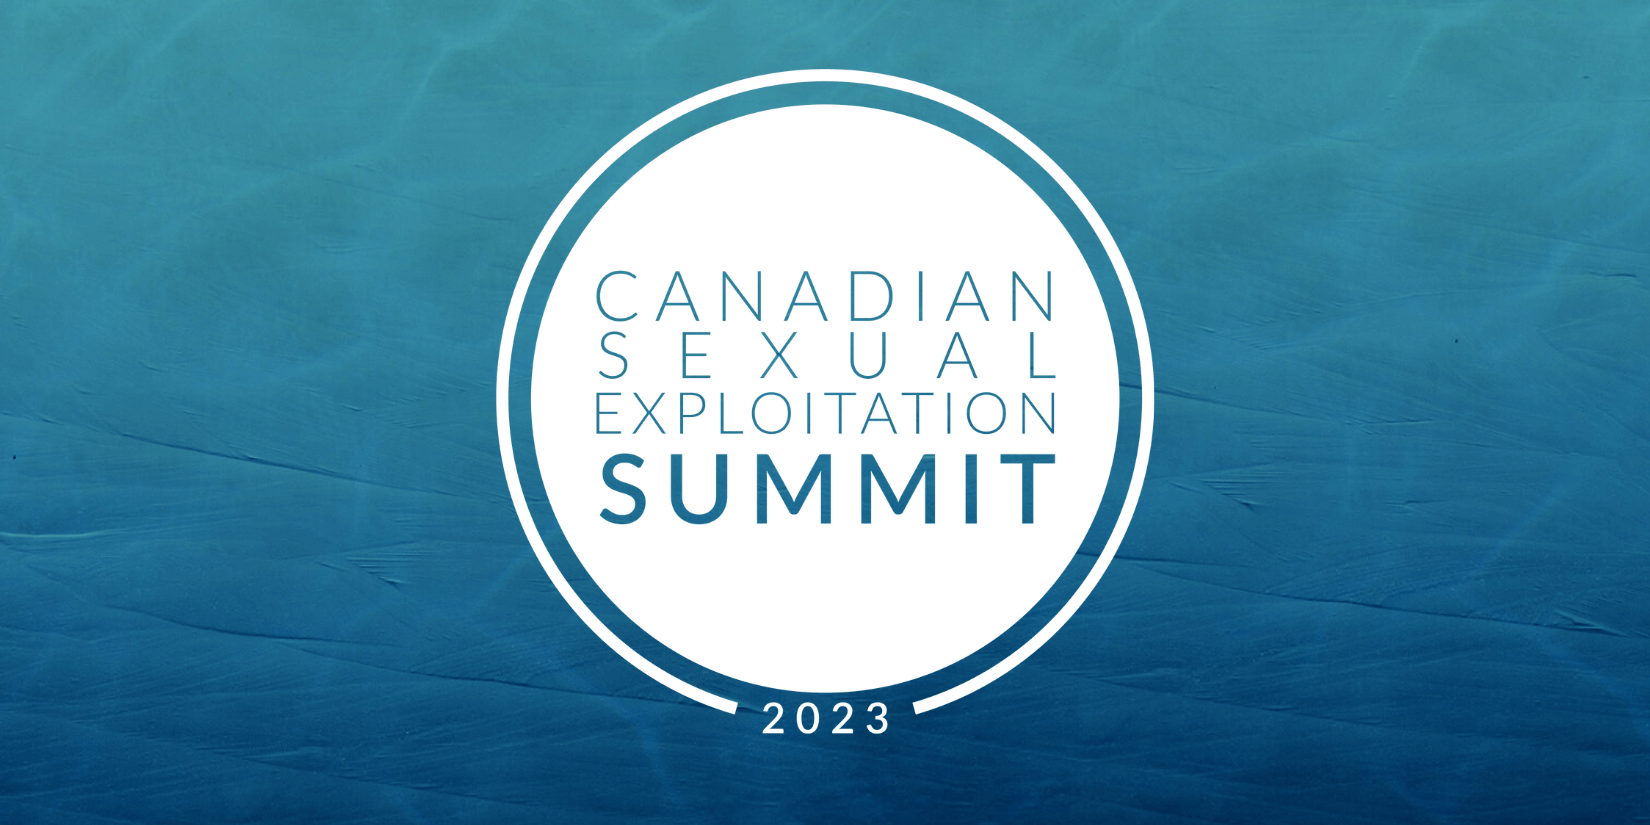 Featured Image for “2023 Canadian Sexual Exploitation Summit”